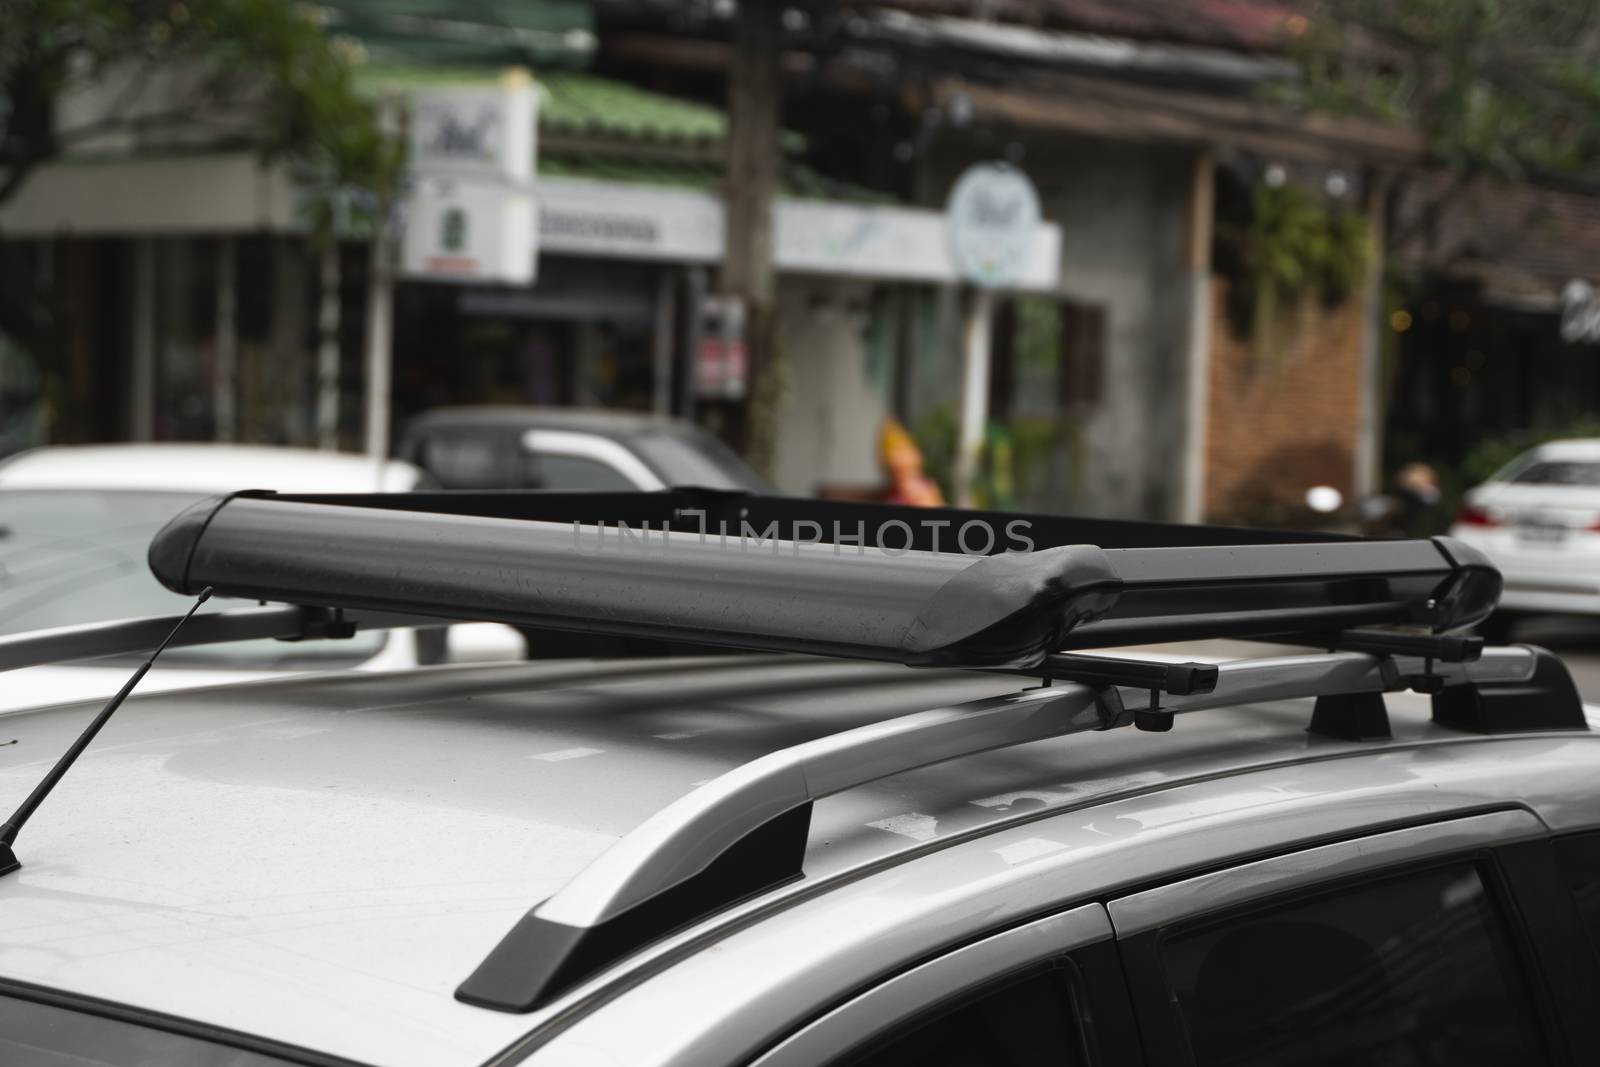 Trunk on the roof of the car for attaching large loads. Roof trunk for bicycle transportation, traveling by car